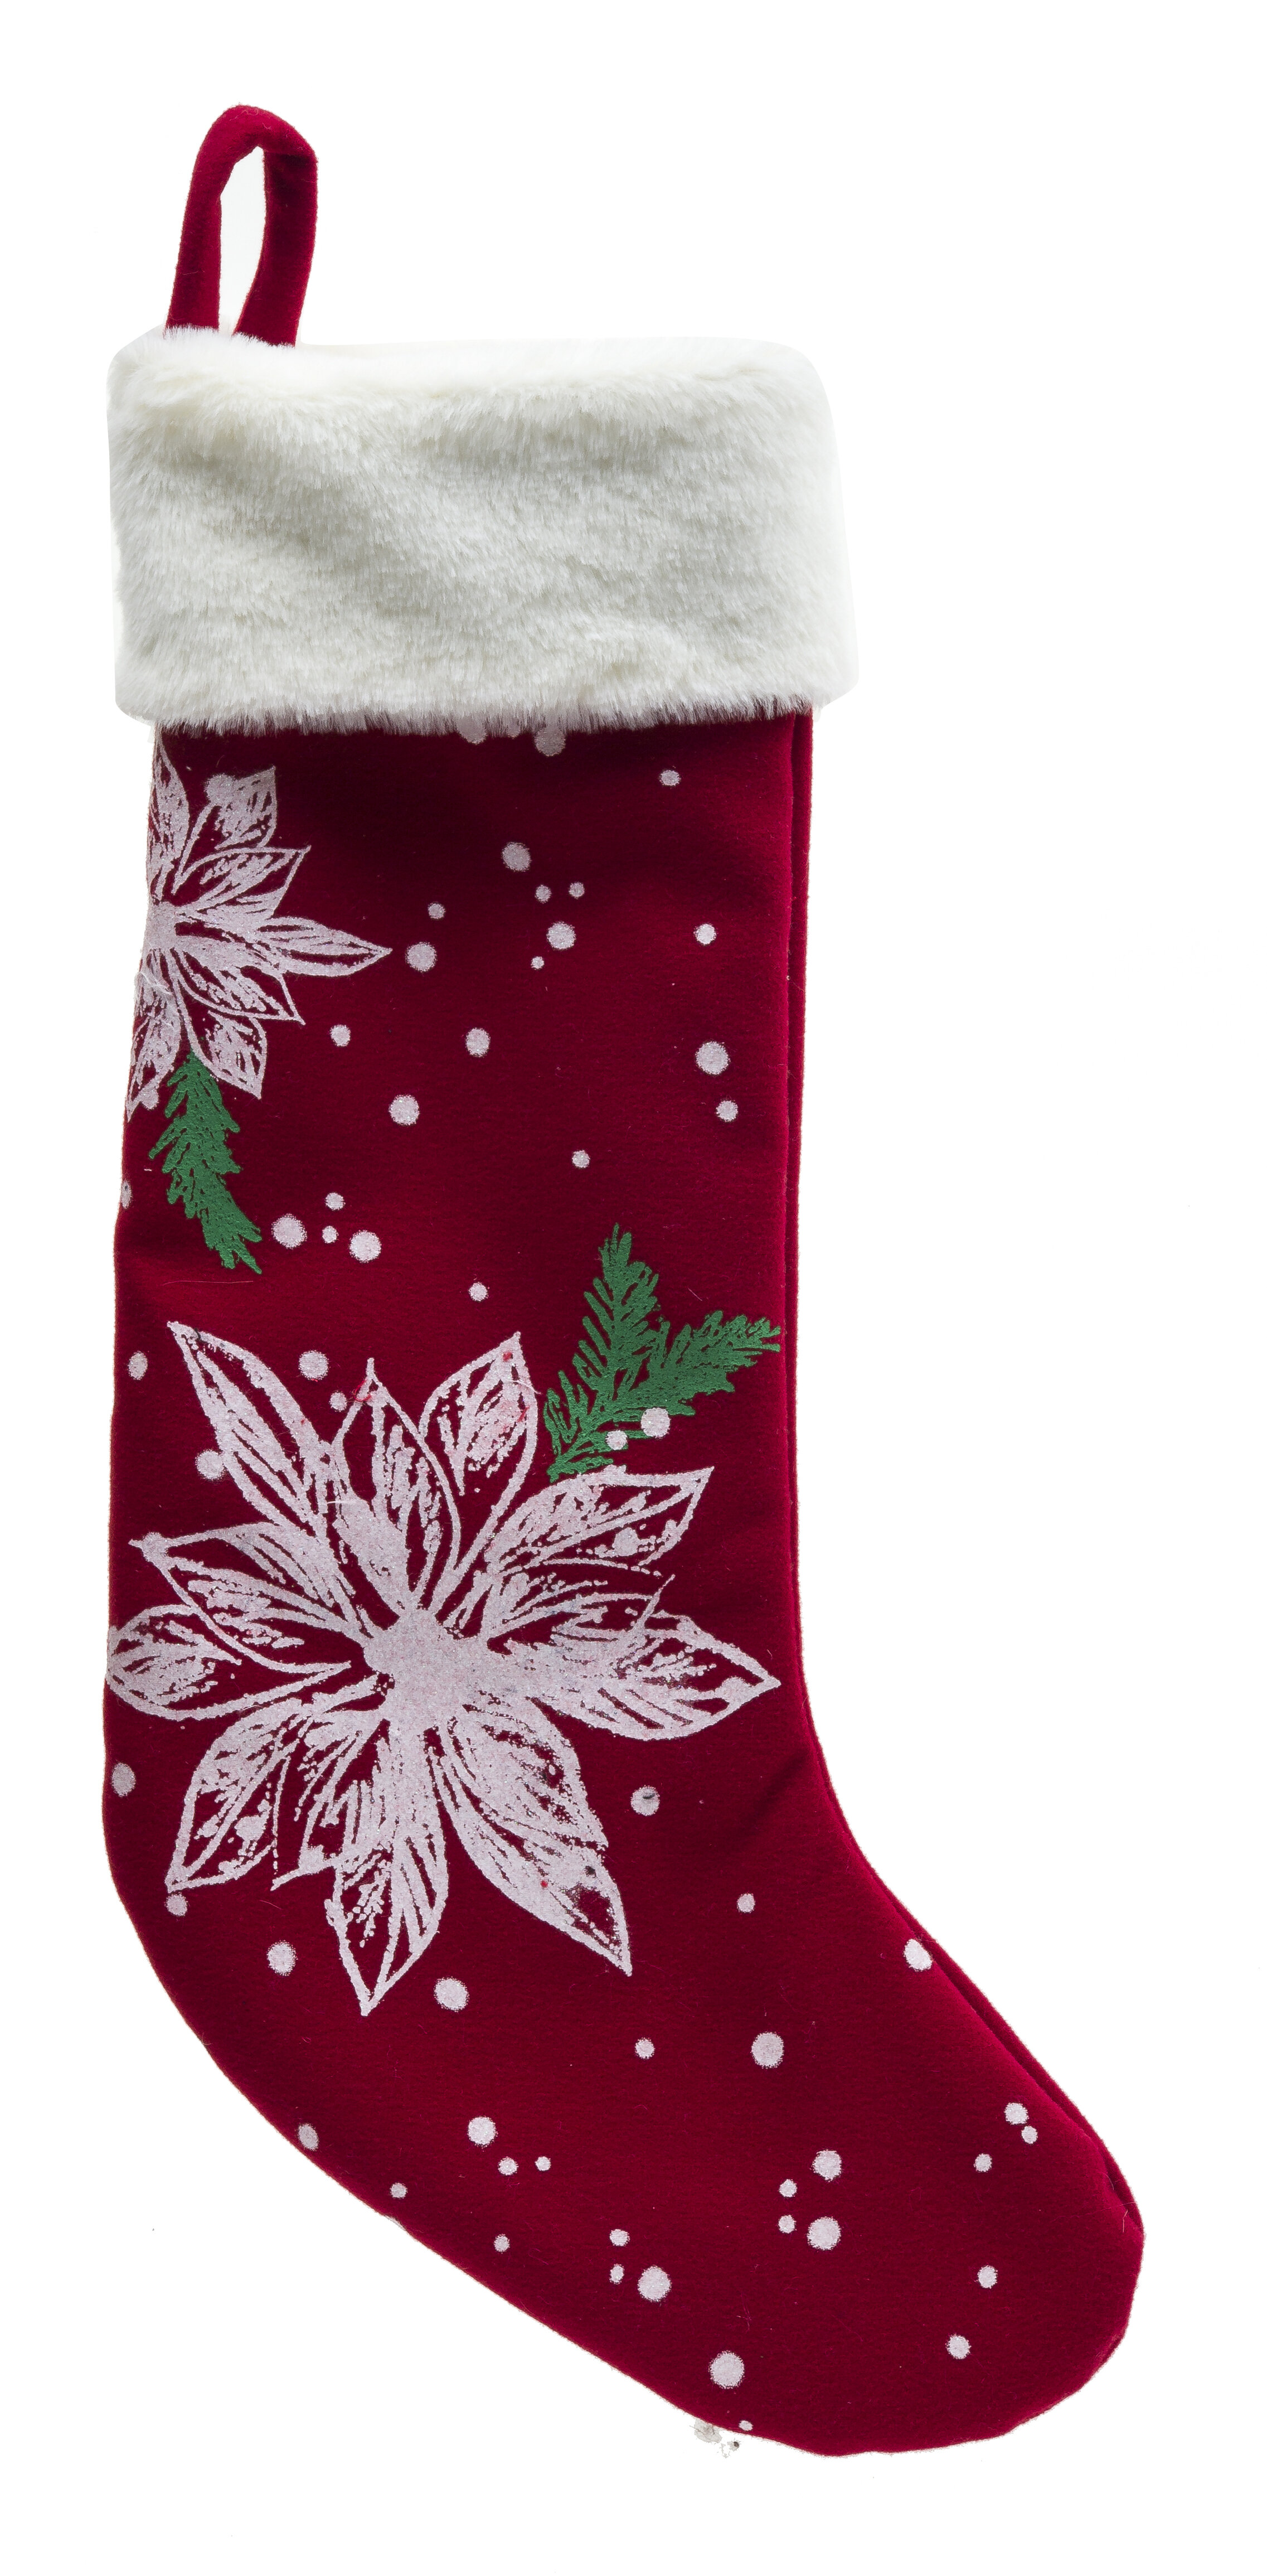 Reindeer Classic Knit Stocking